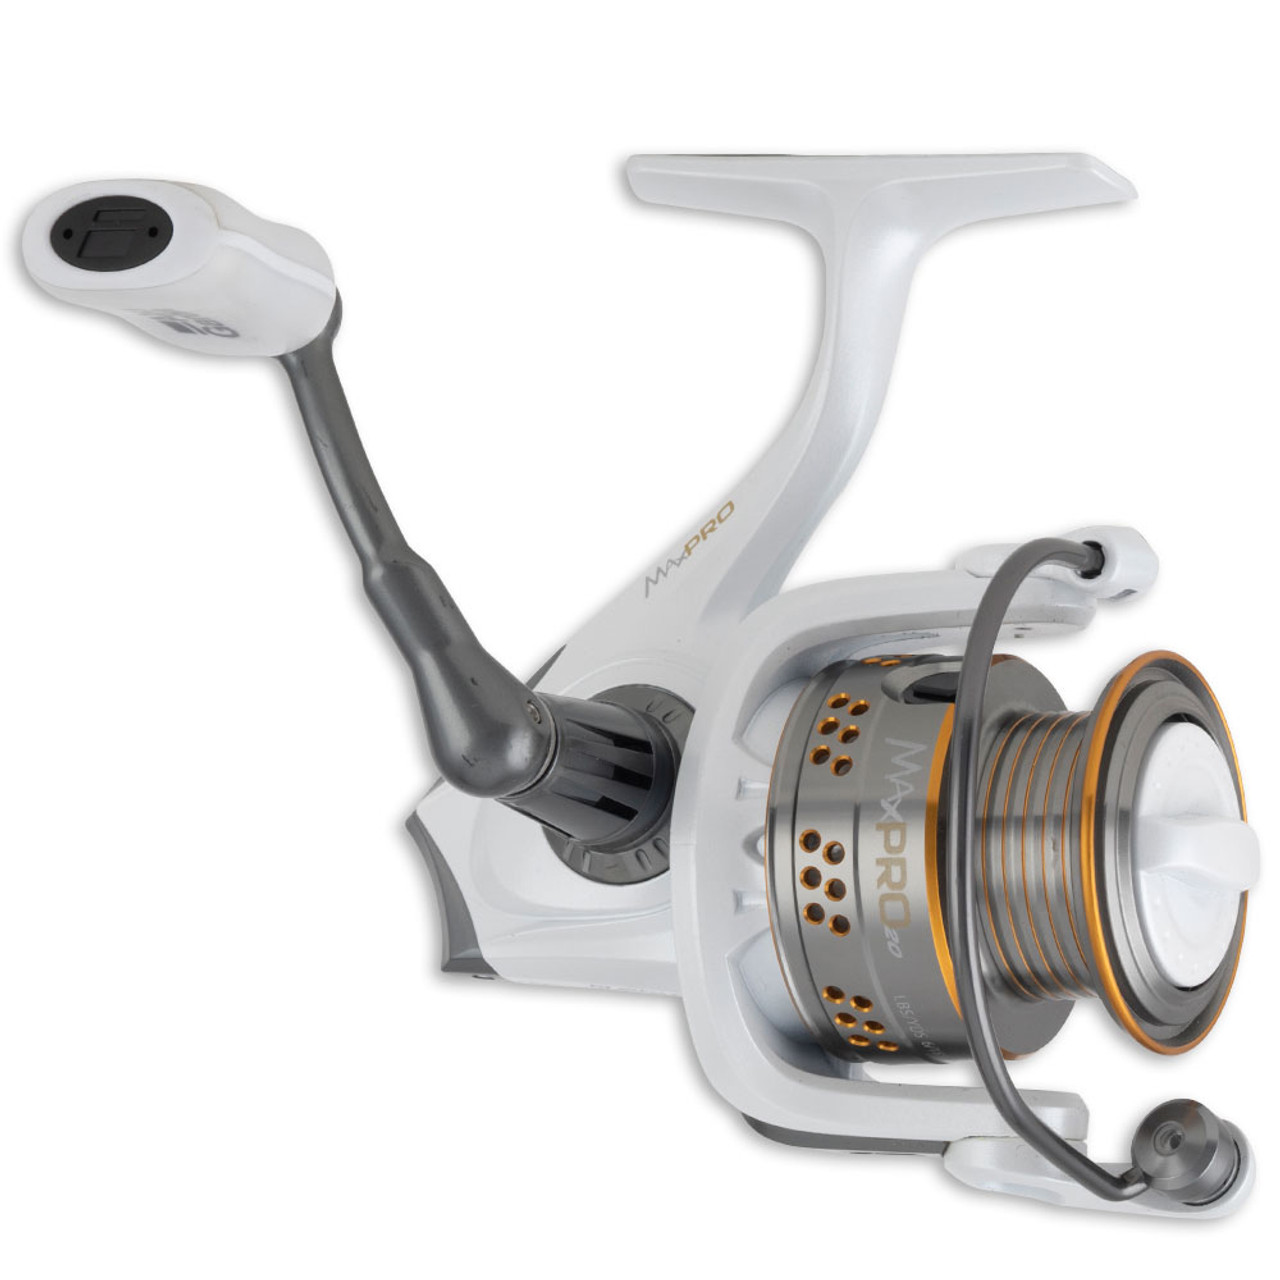  Abu Garcia Cardinal Spinning Reel - All-Round Fishing Spin Reel  for Freshwater or Saltwater, Black : Sports & Outdoors